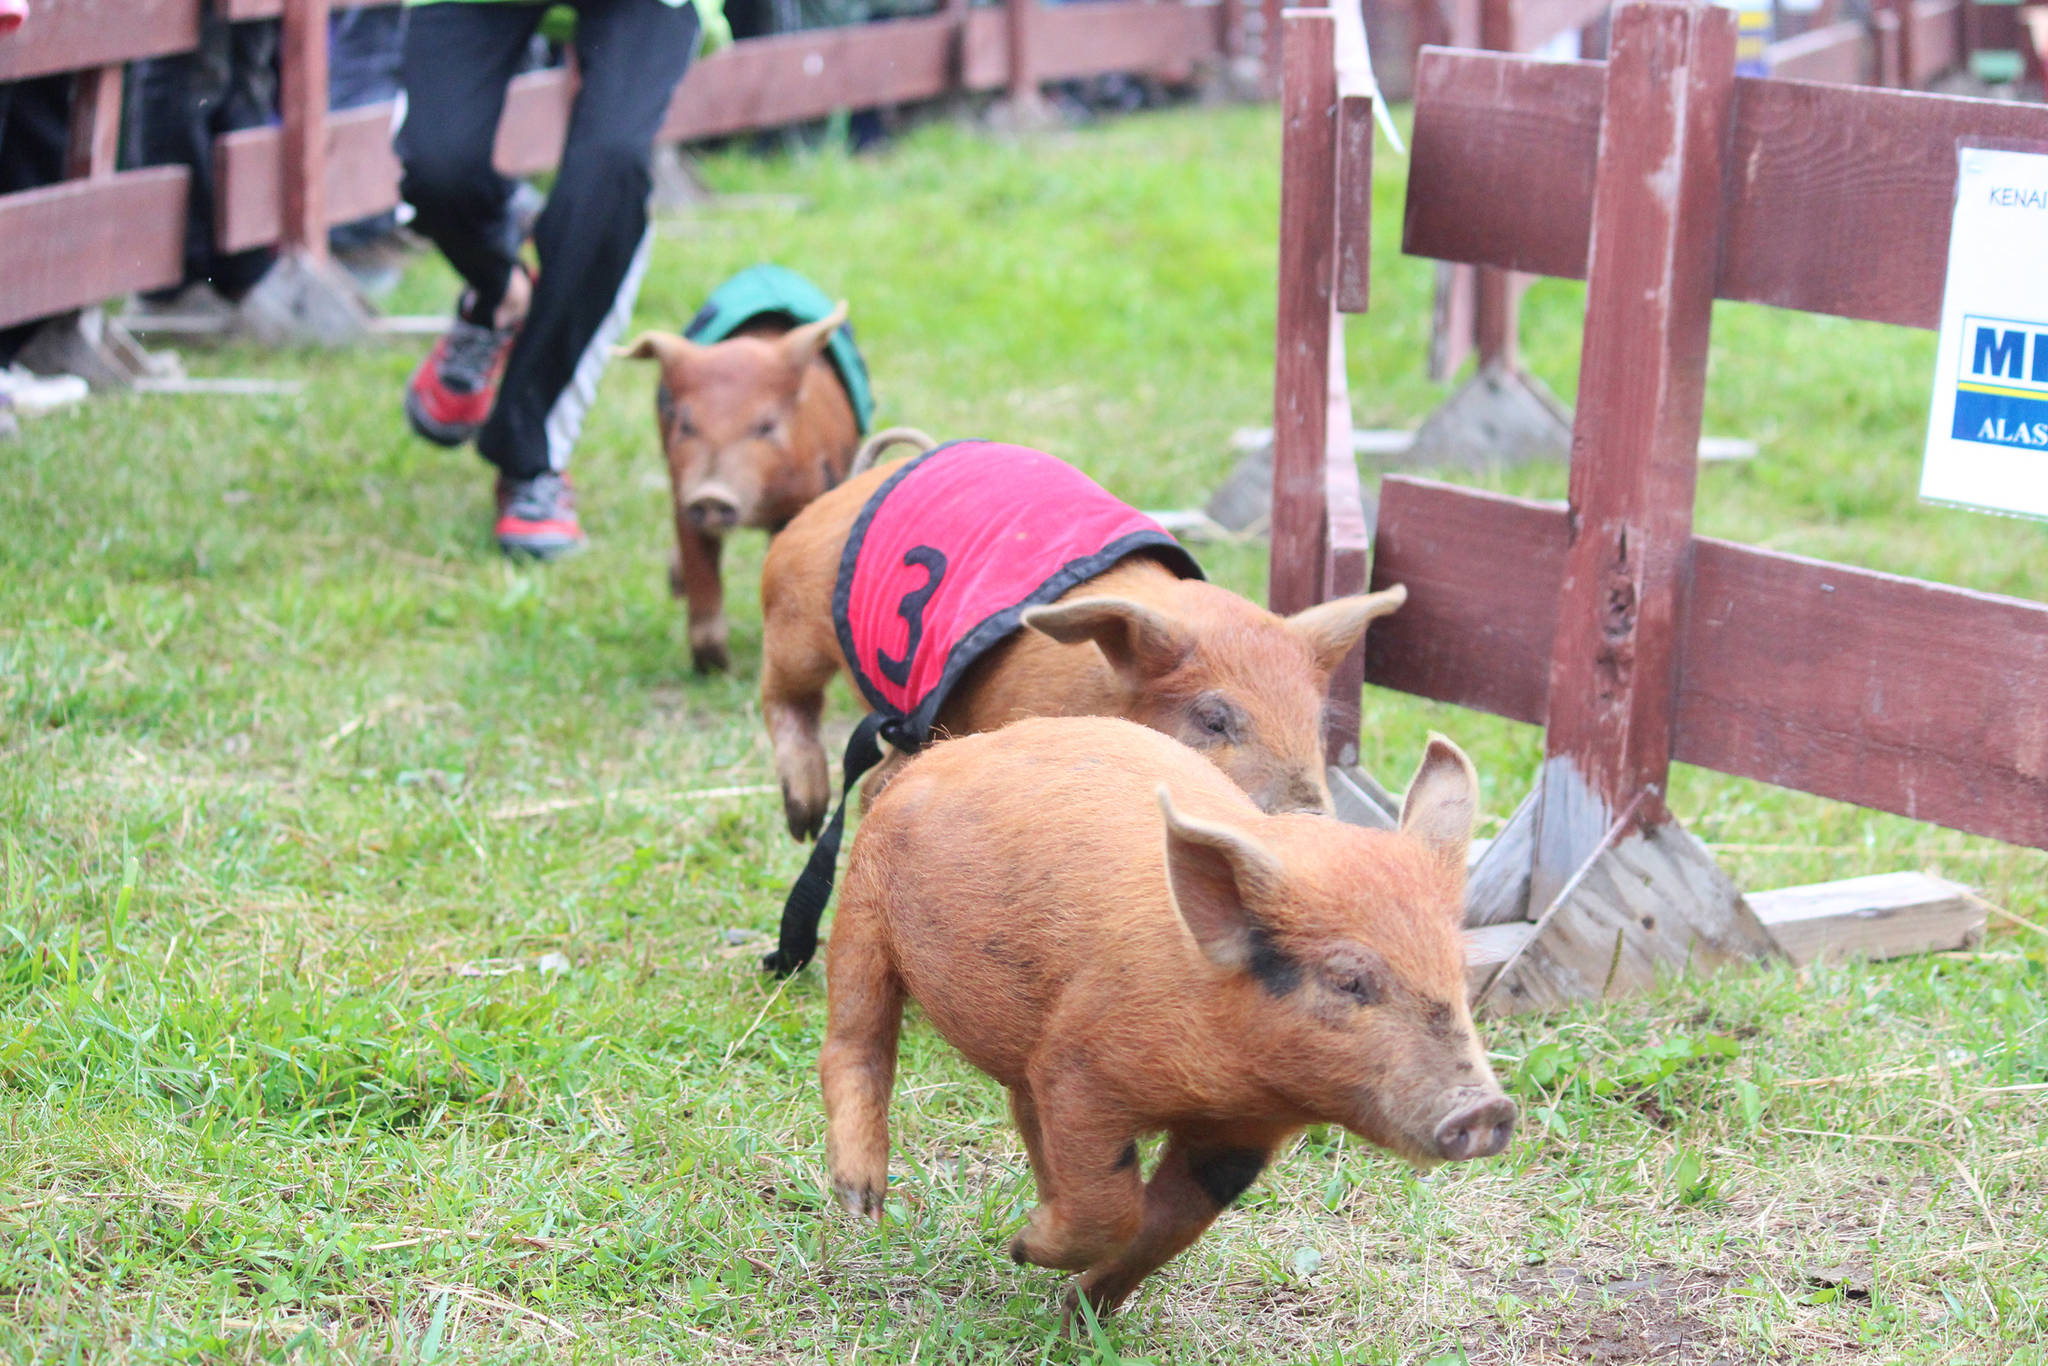 Pigs run through a circular course, chased by a young volunteer, during the pig races at the Kenai Peninsula Fair, on Aug. 18, 2018 at the fairgrounds in Ninilchik, Alaska. (Photo by Megan Pacer/Homer News)